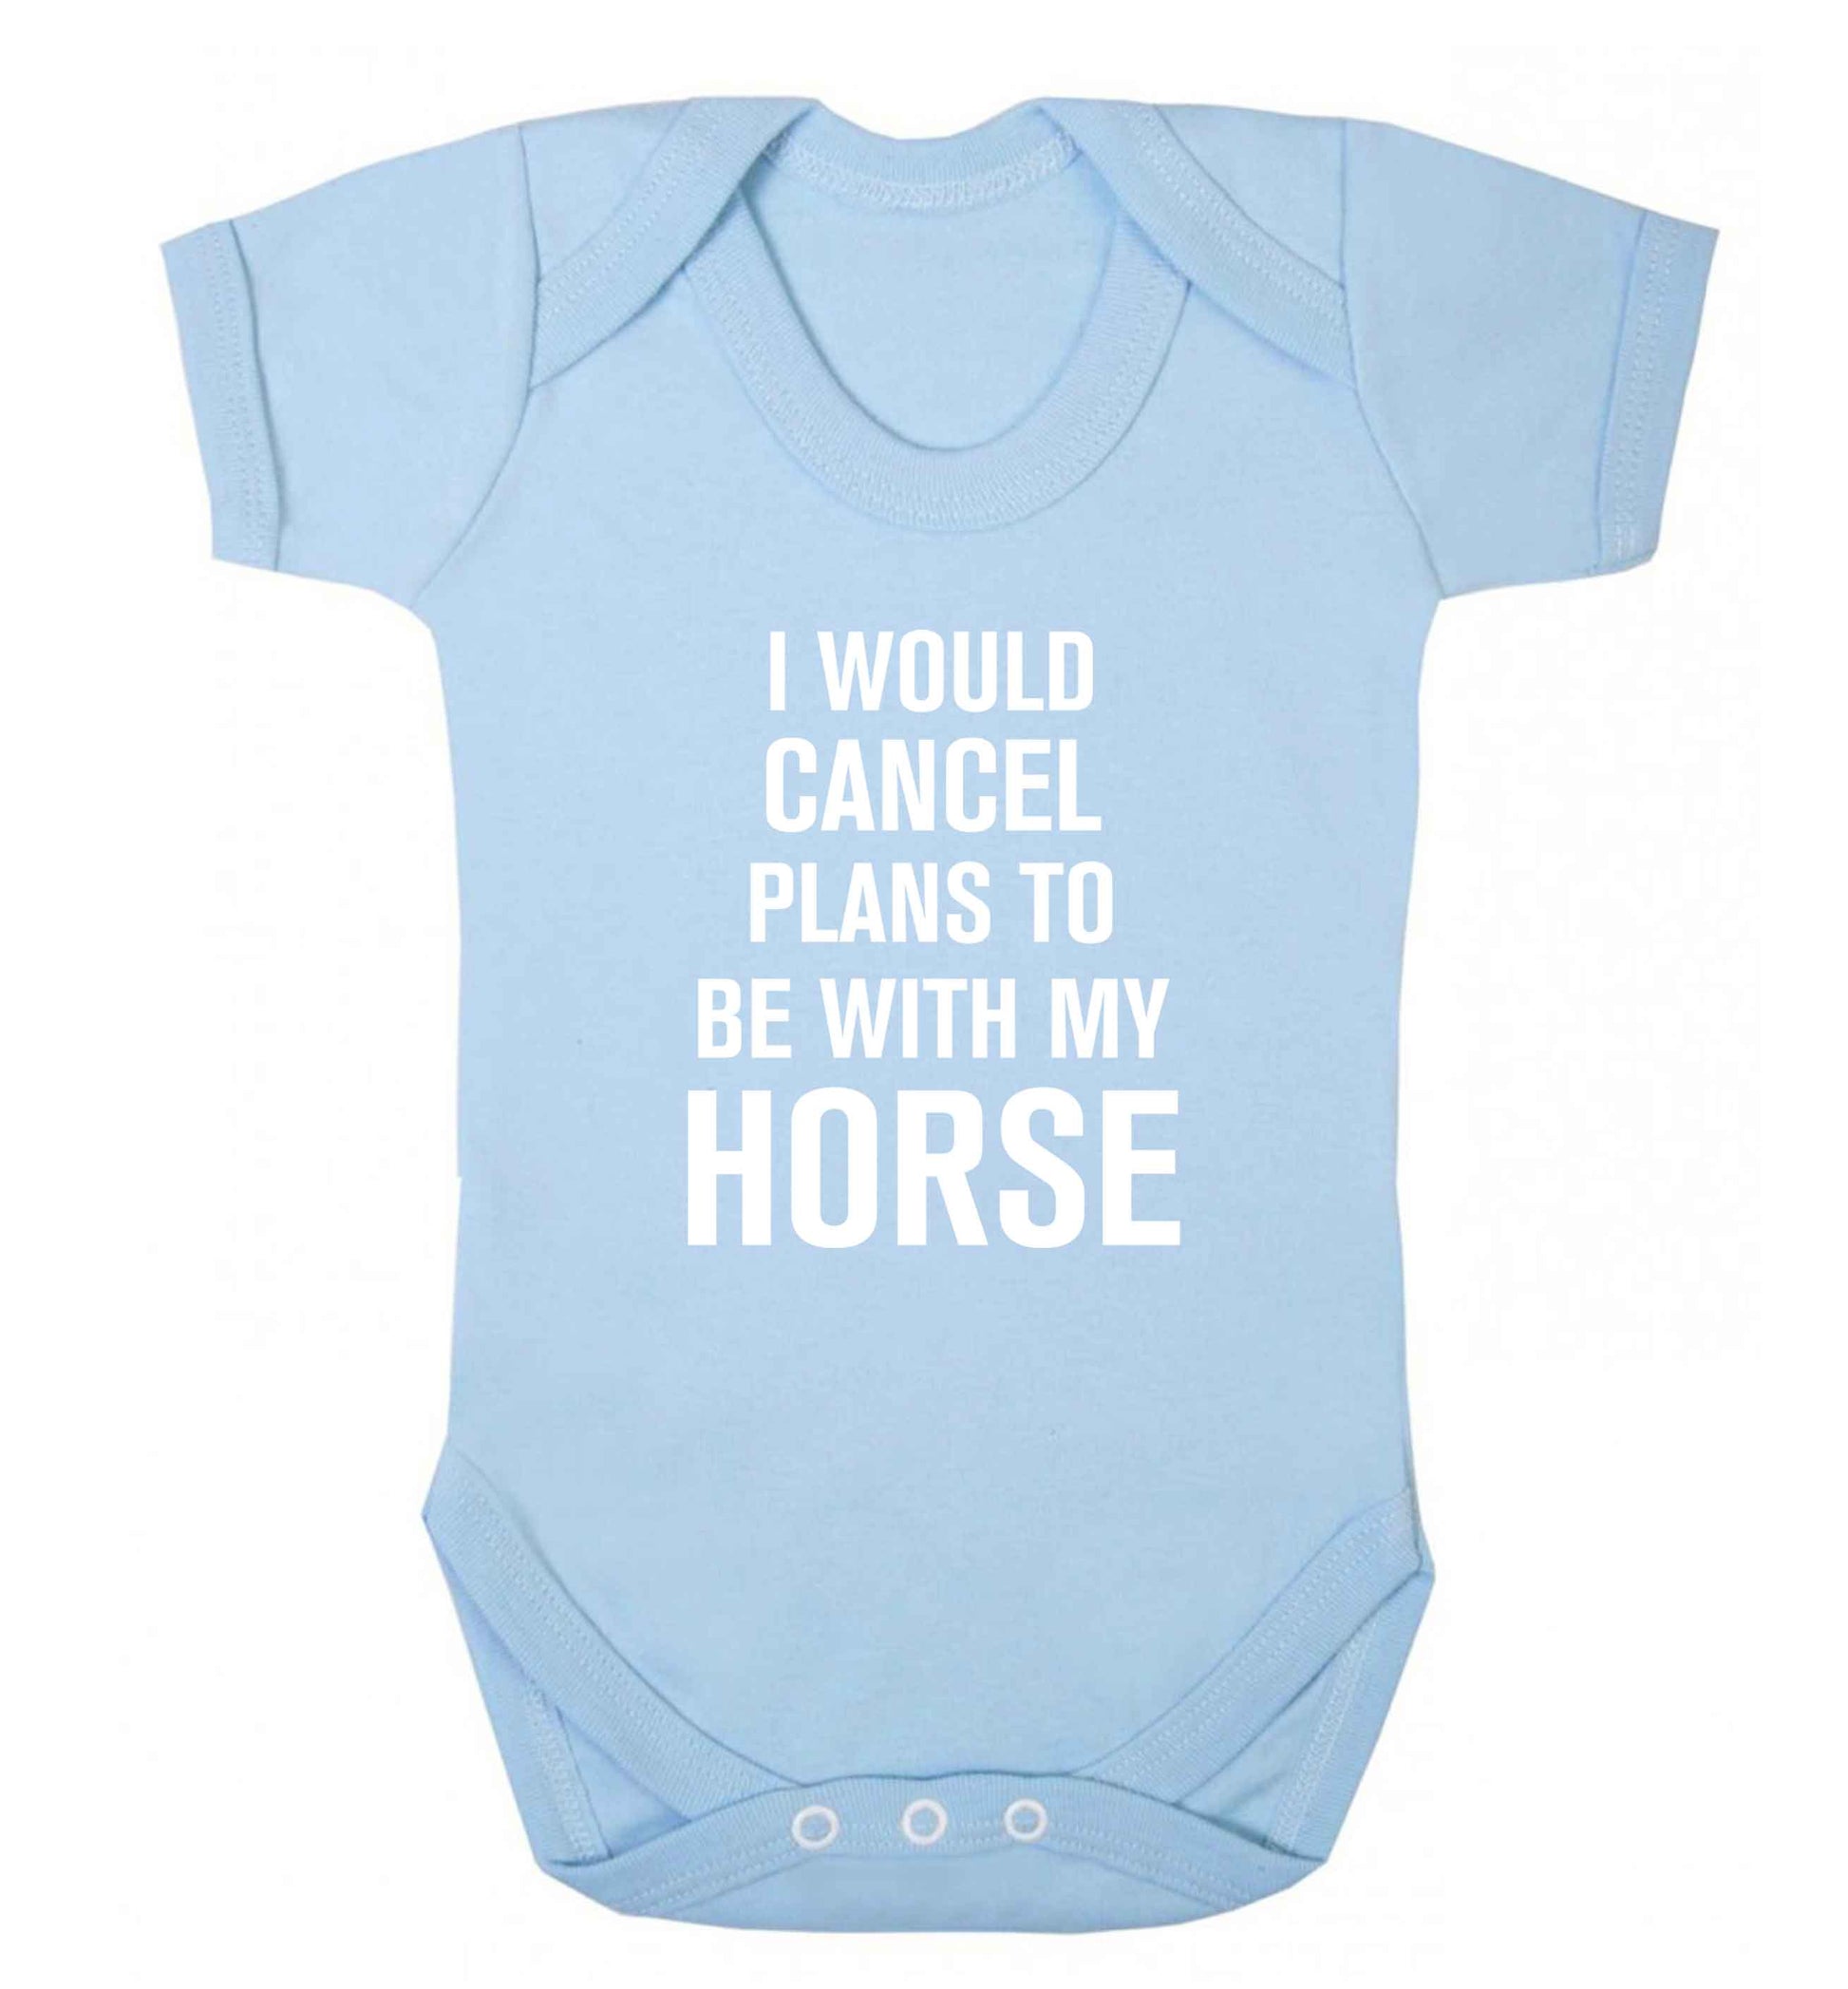 I will cancel plans to be with my horse baby vest pale blue 18-24 months